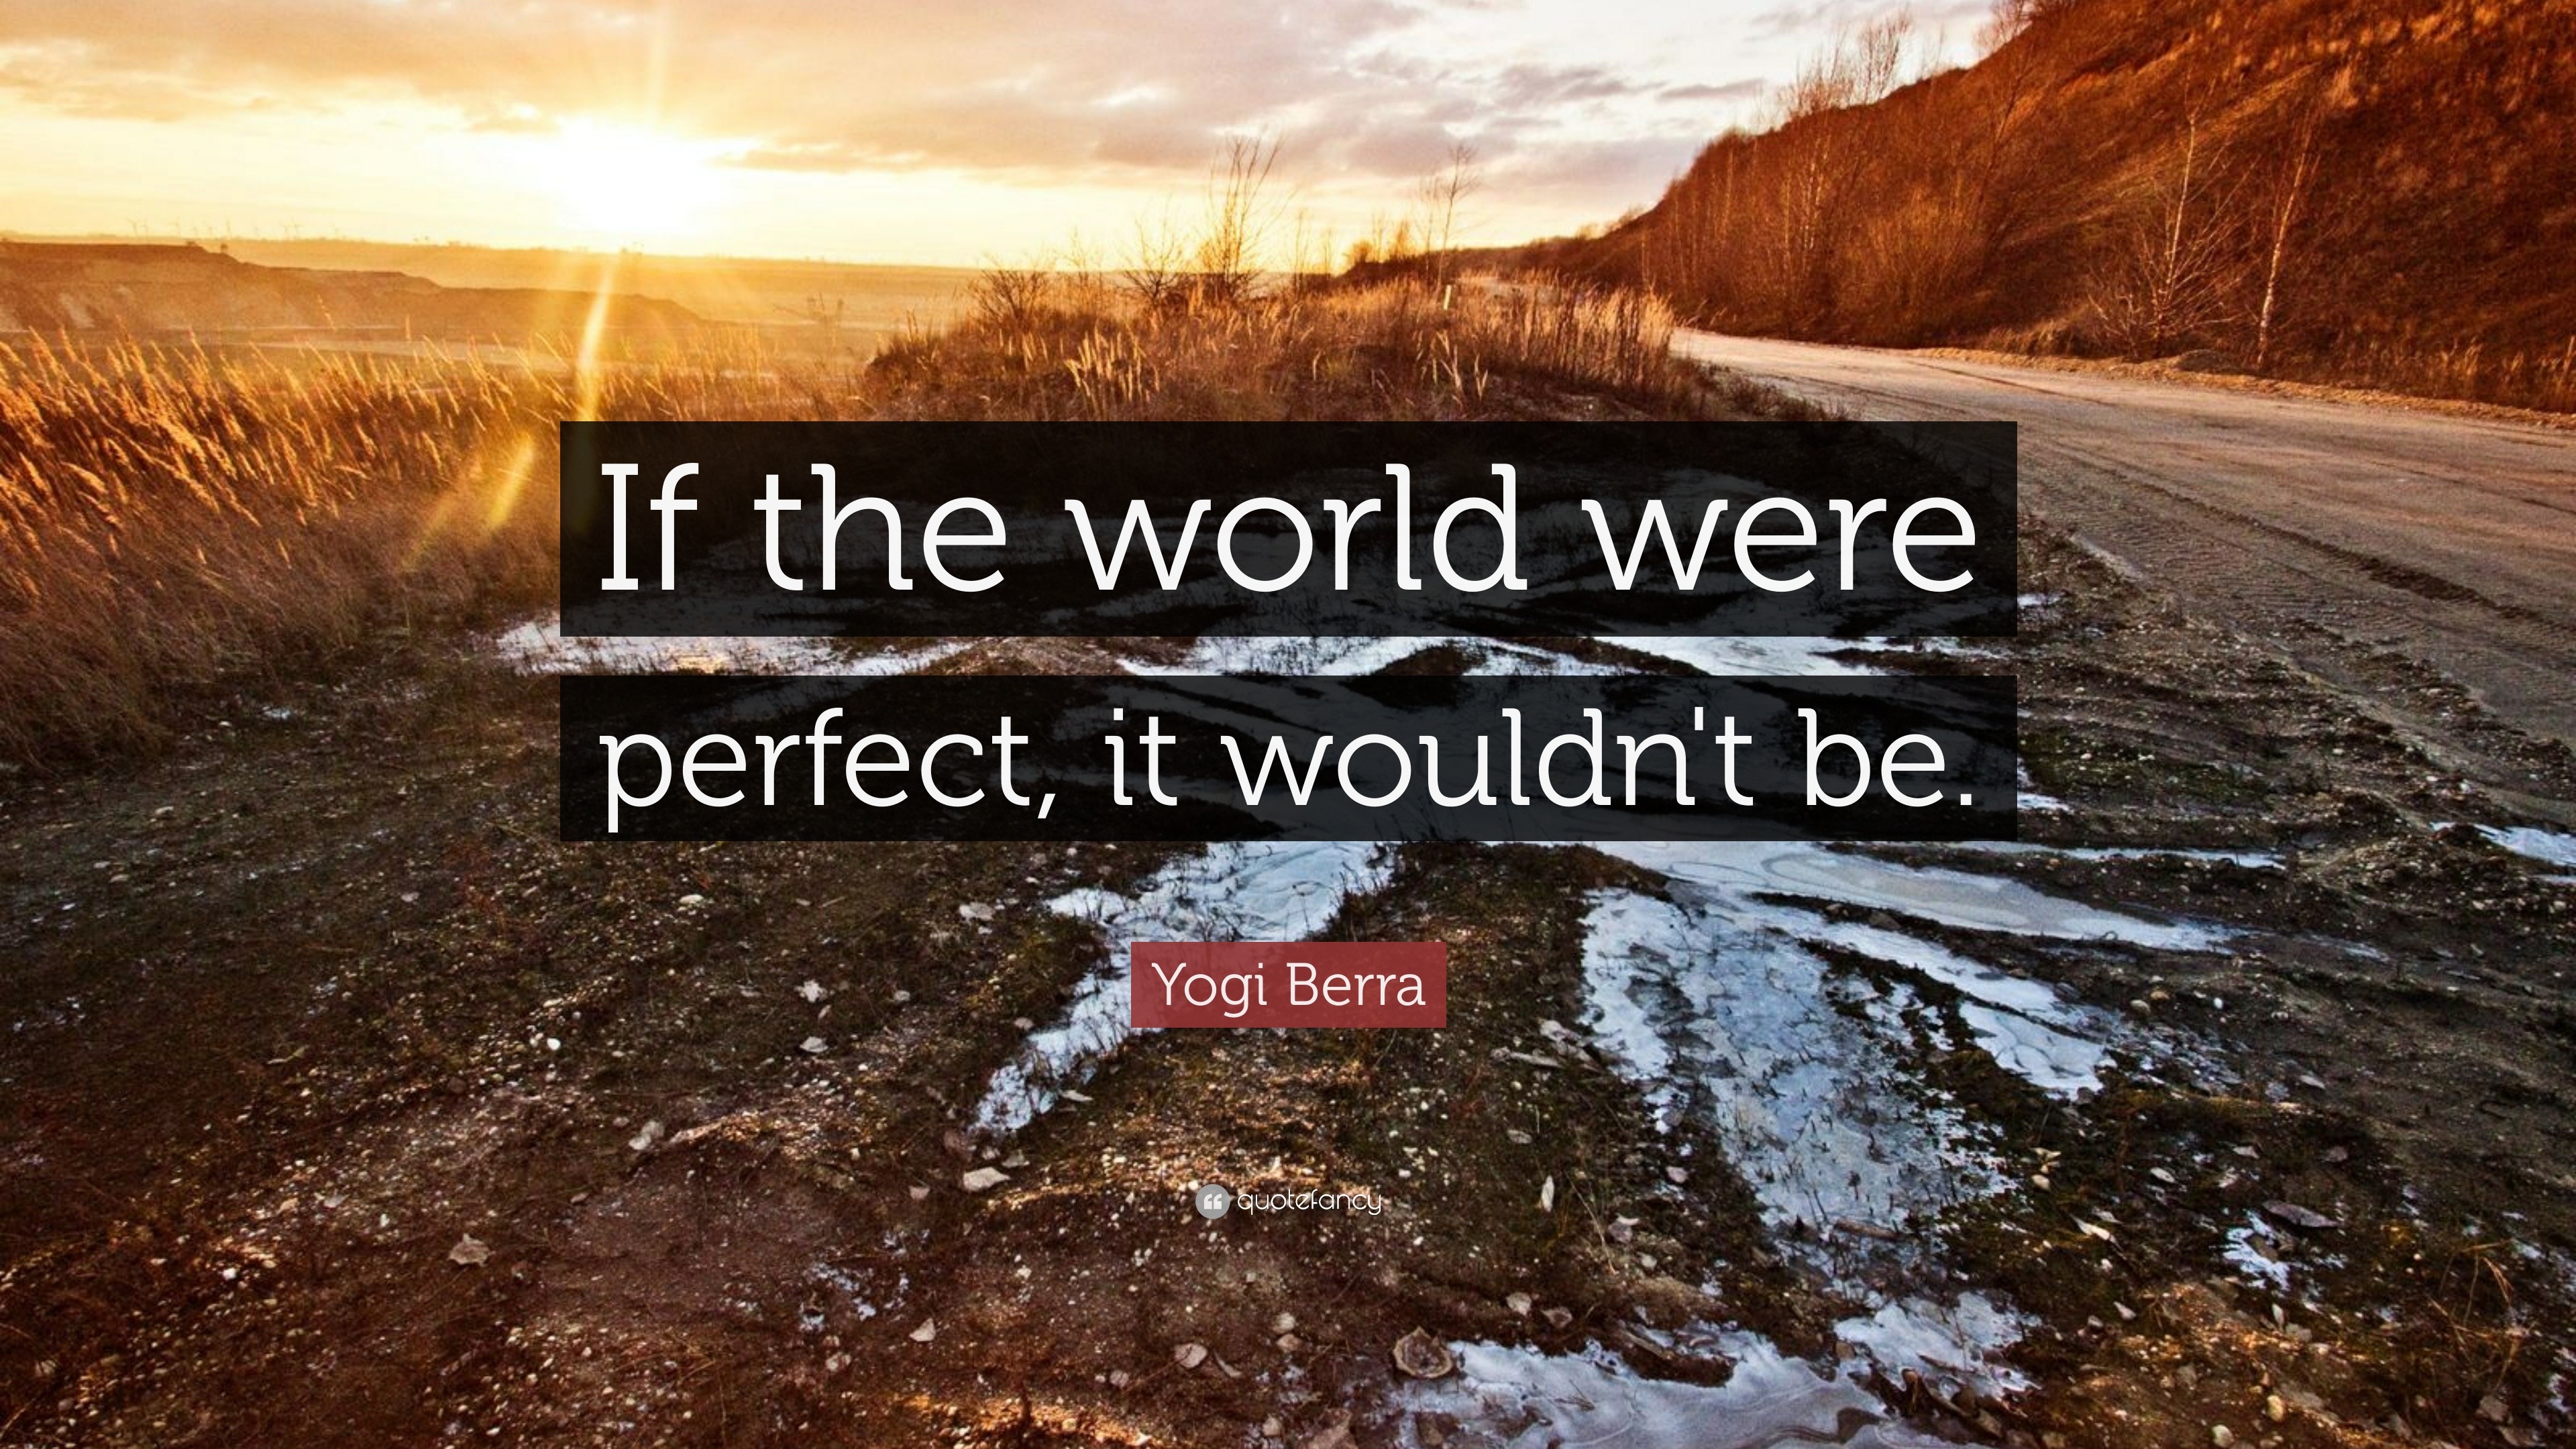 Yogi Berra - If the world were perfect, it wouldn't be.